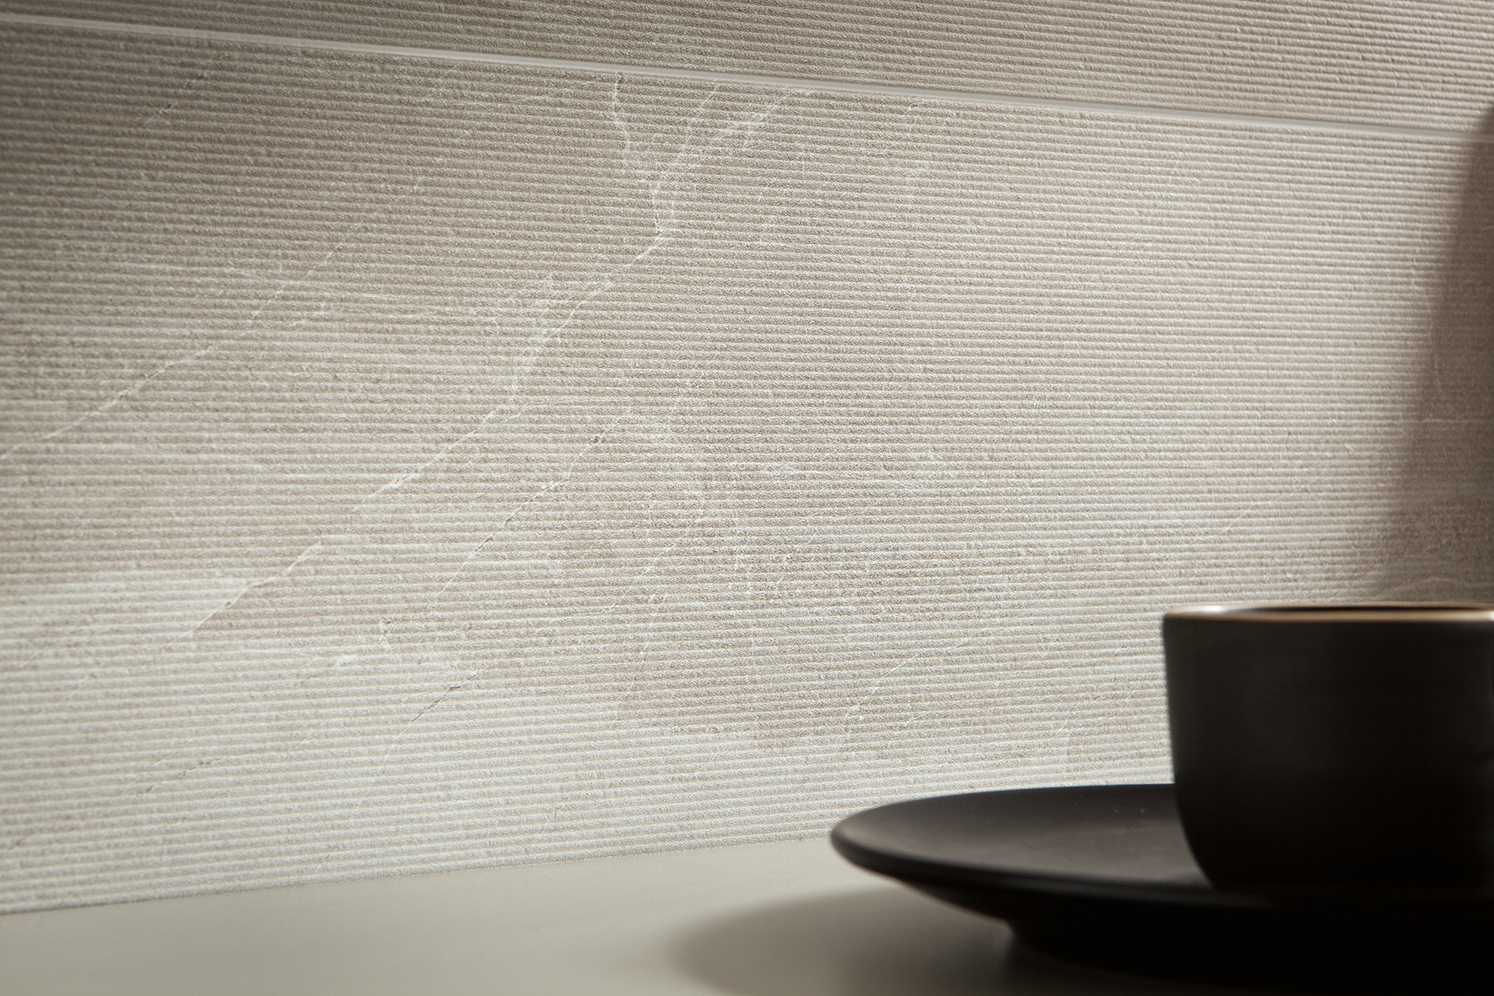 Introducing Geologica. A new stone-effect porcelain tile from Italy.